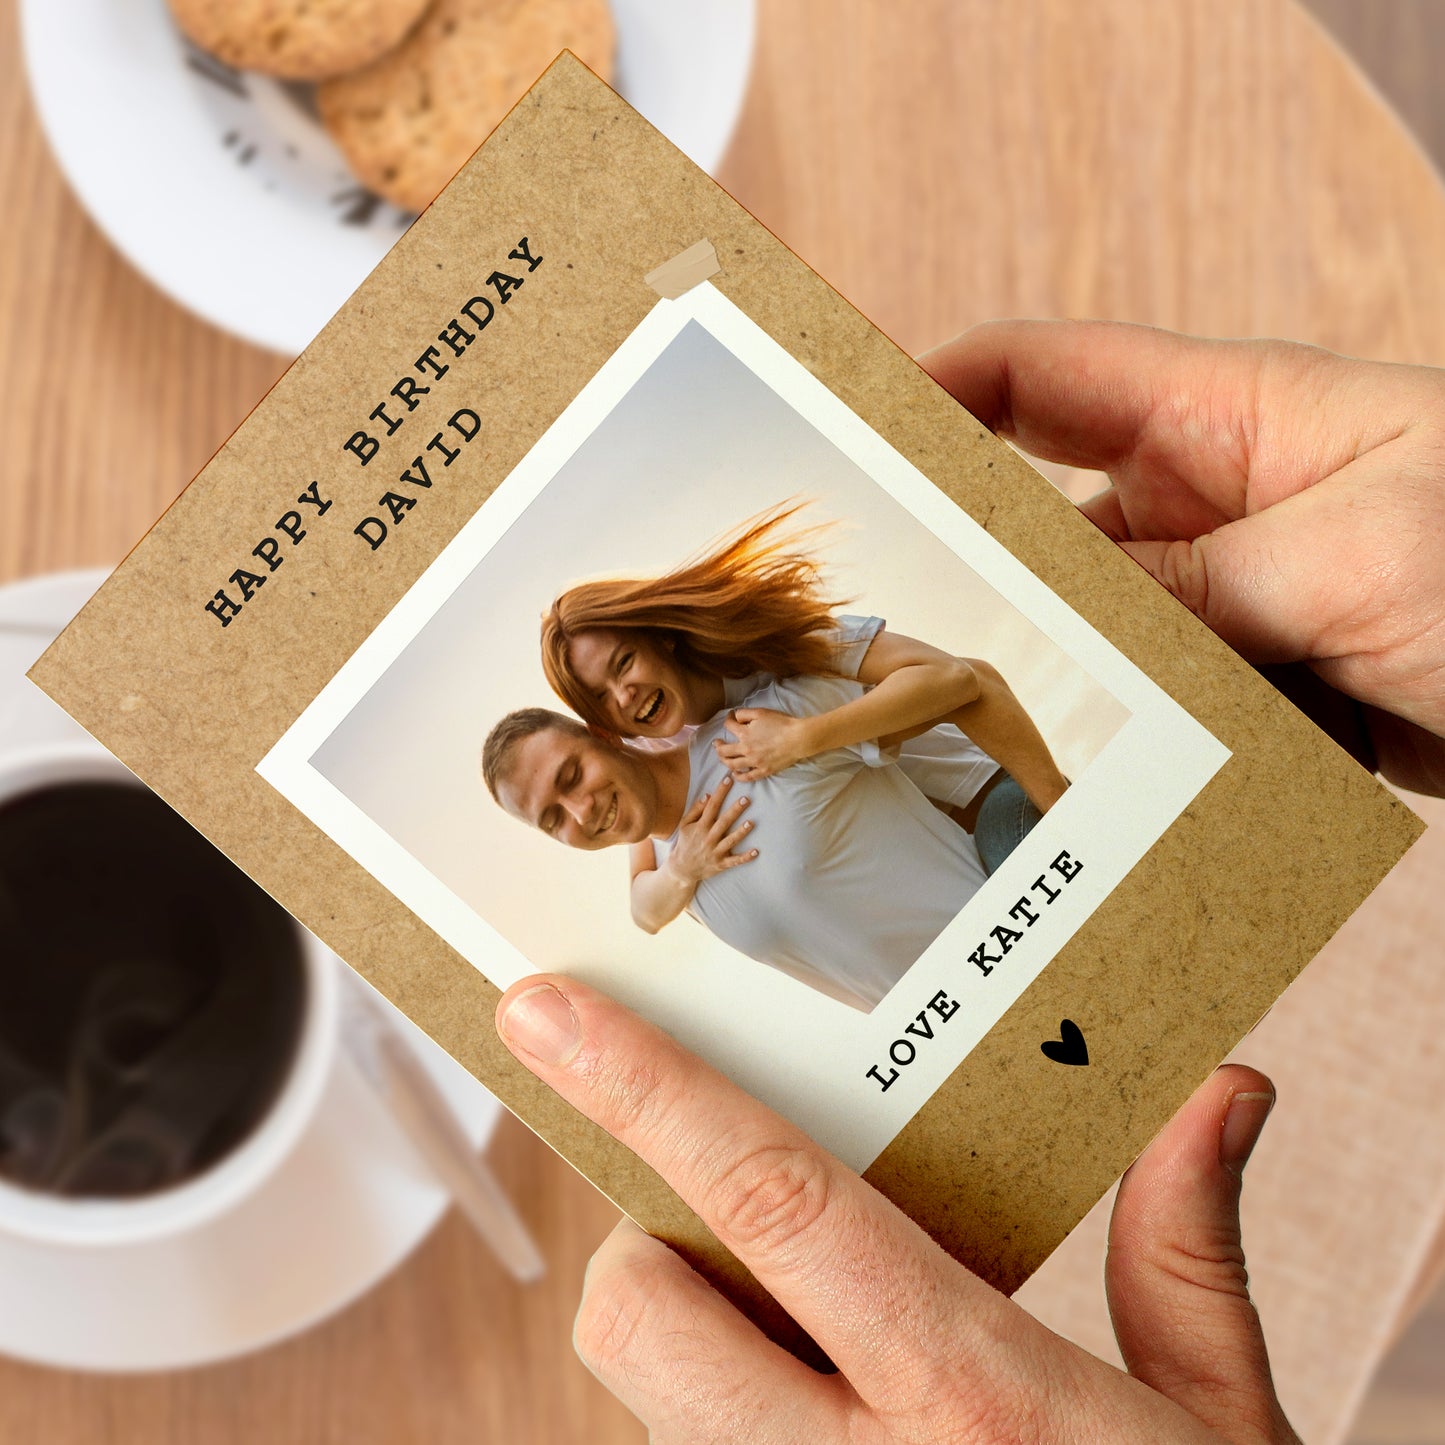 Personalised Polaroid Style Photo Upload Greeting Card - FREE STANDARD UK DELIVERY! - Violet Belle Gifts - Personalised Polaroid Greeting Card Photo Upload - FREE STANDARD UK DELIVERY!